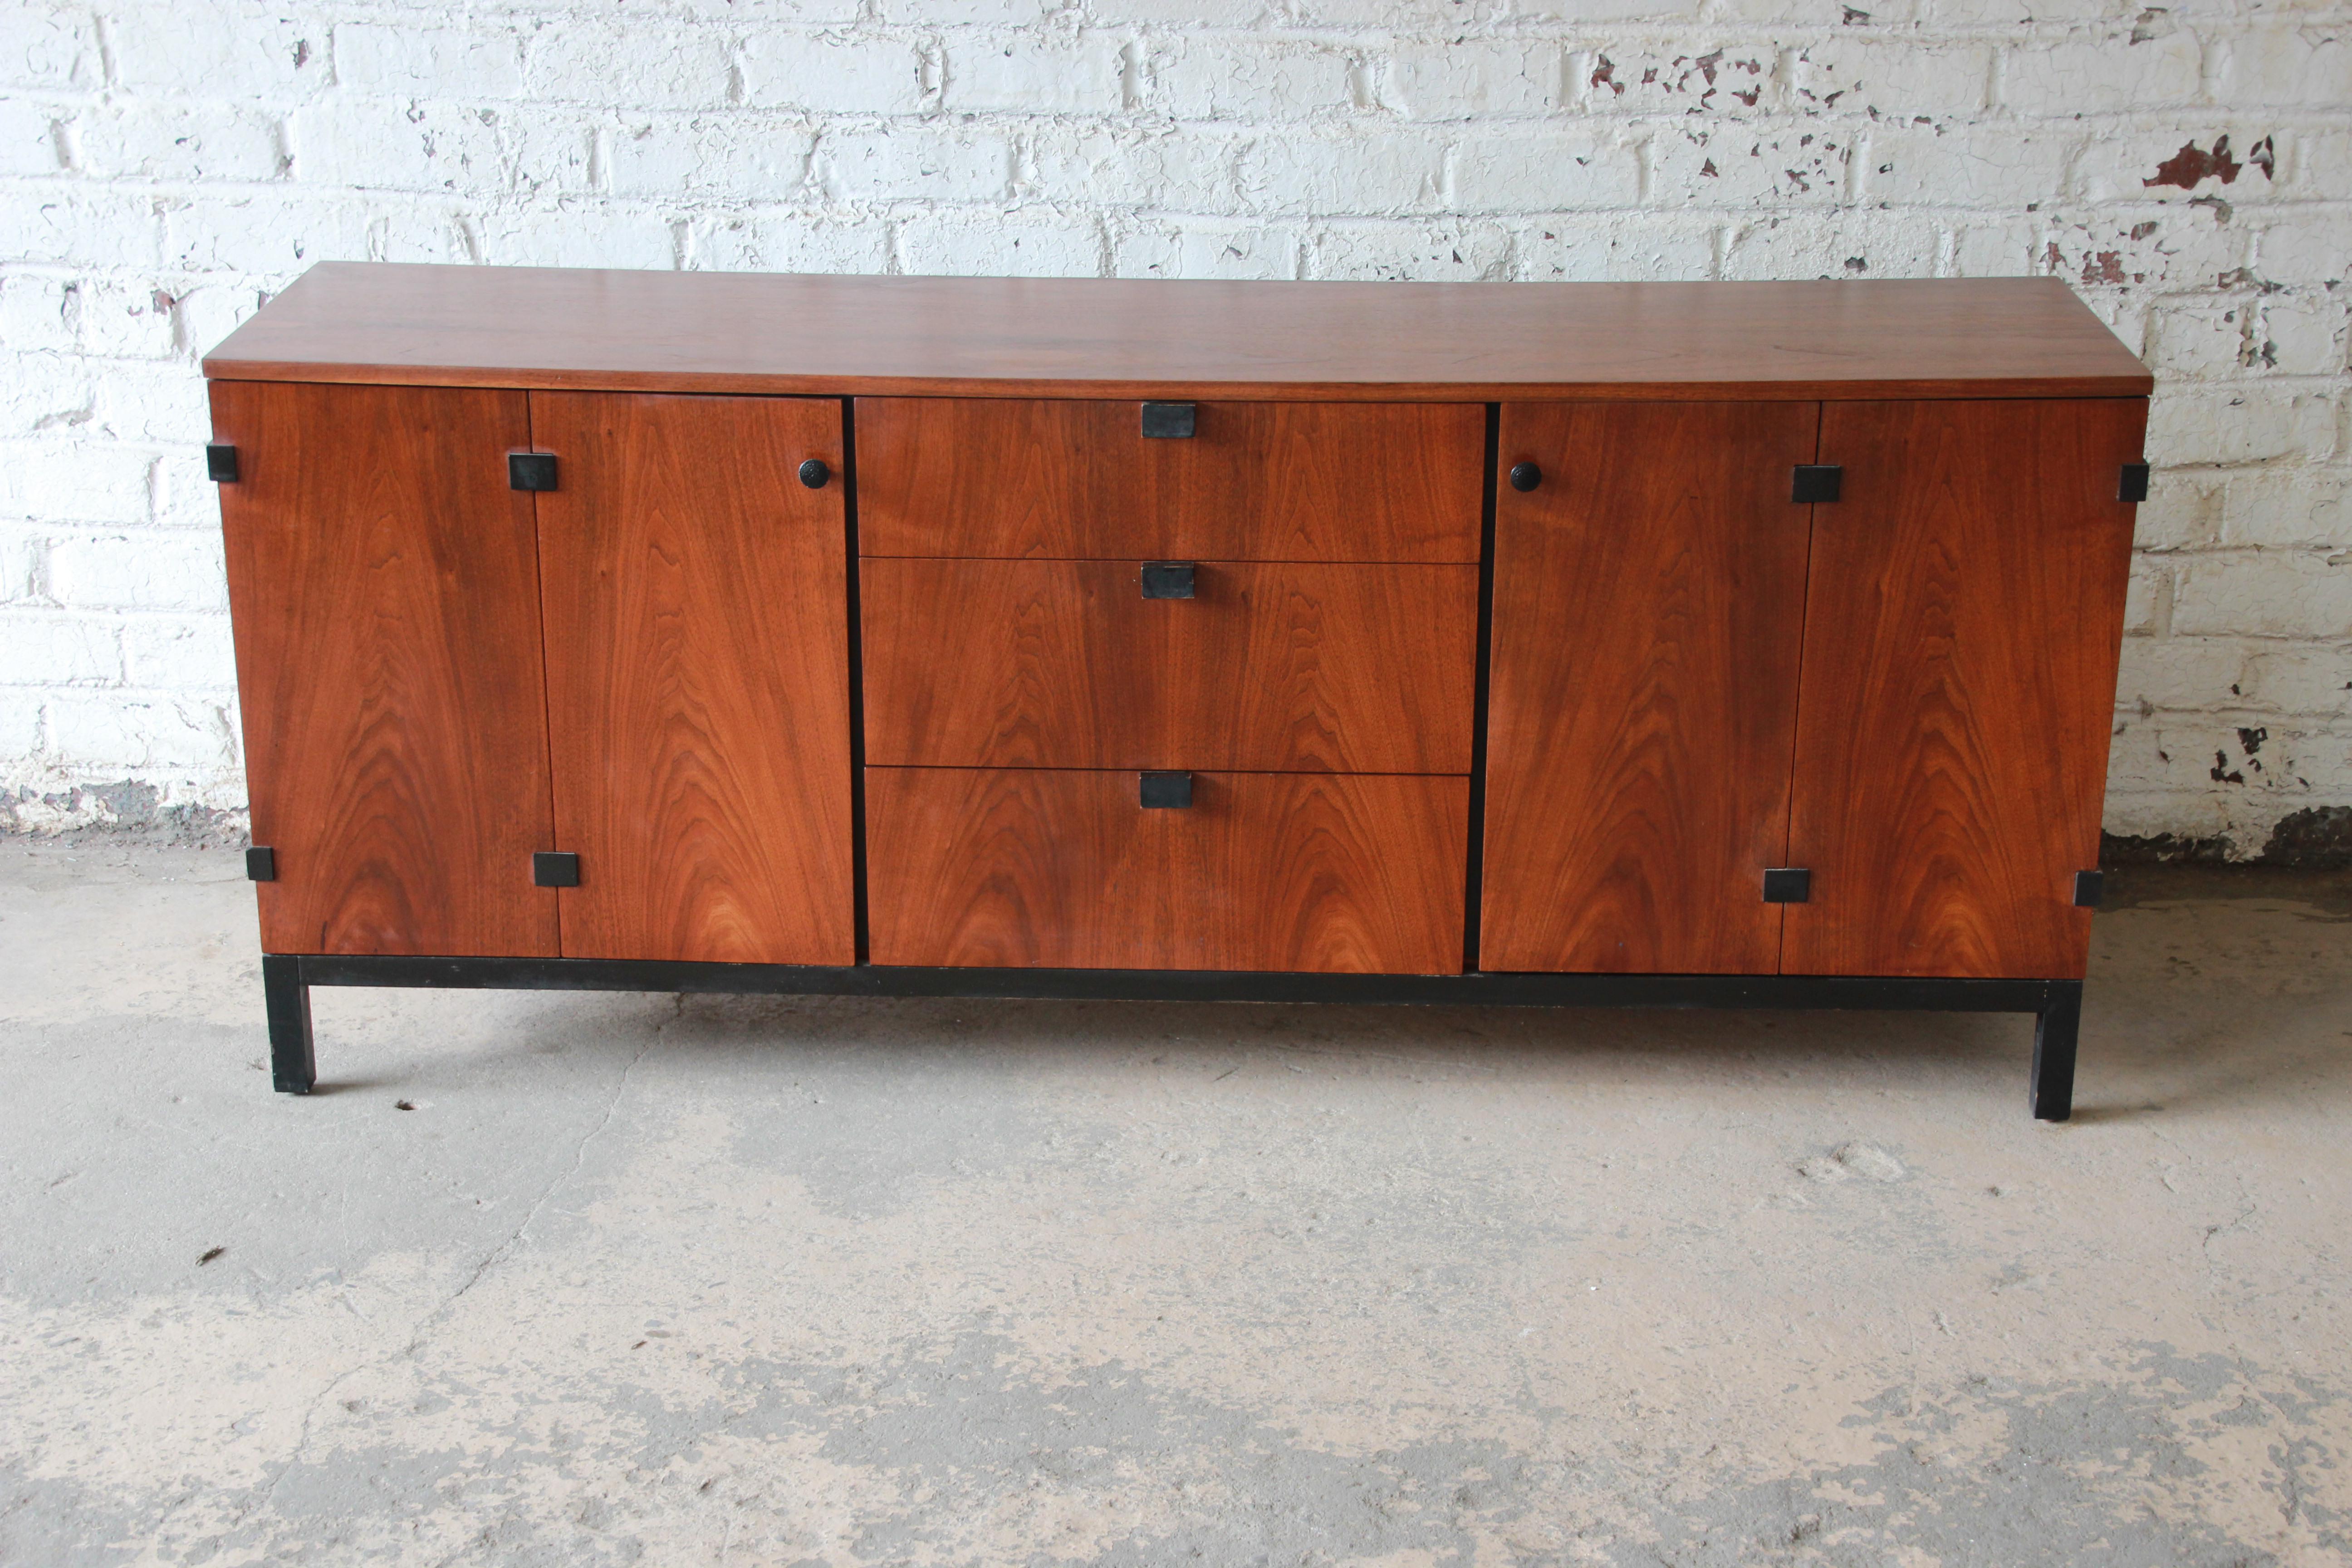 Offering a stunning Mid-Century Modern walnut nine-drawer credenza or triple dresser designed by Milo Baughman for Directional circa 1960s. The credenza features gorgeous book-matched walnut wood grain, with sculpted ebonized pulls and an ebonized